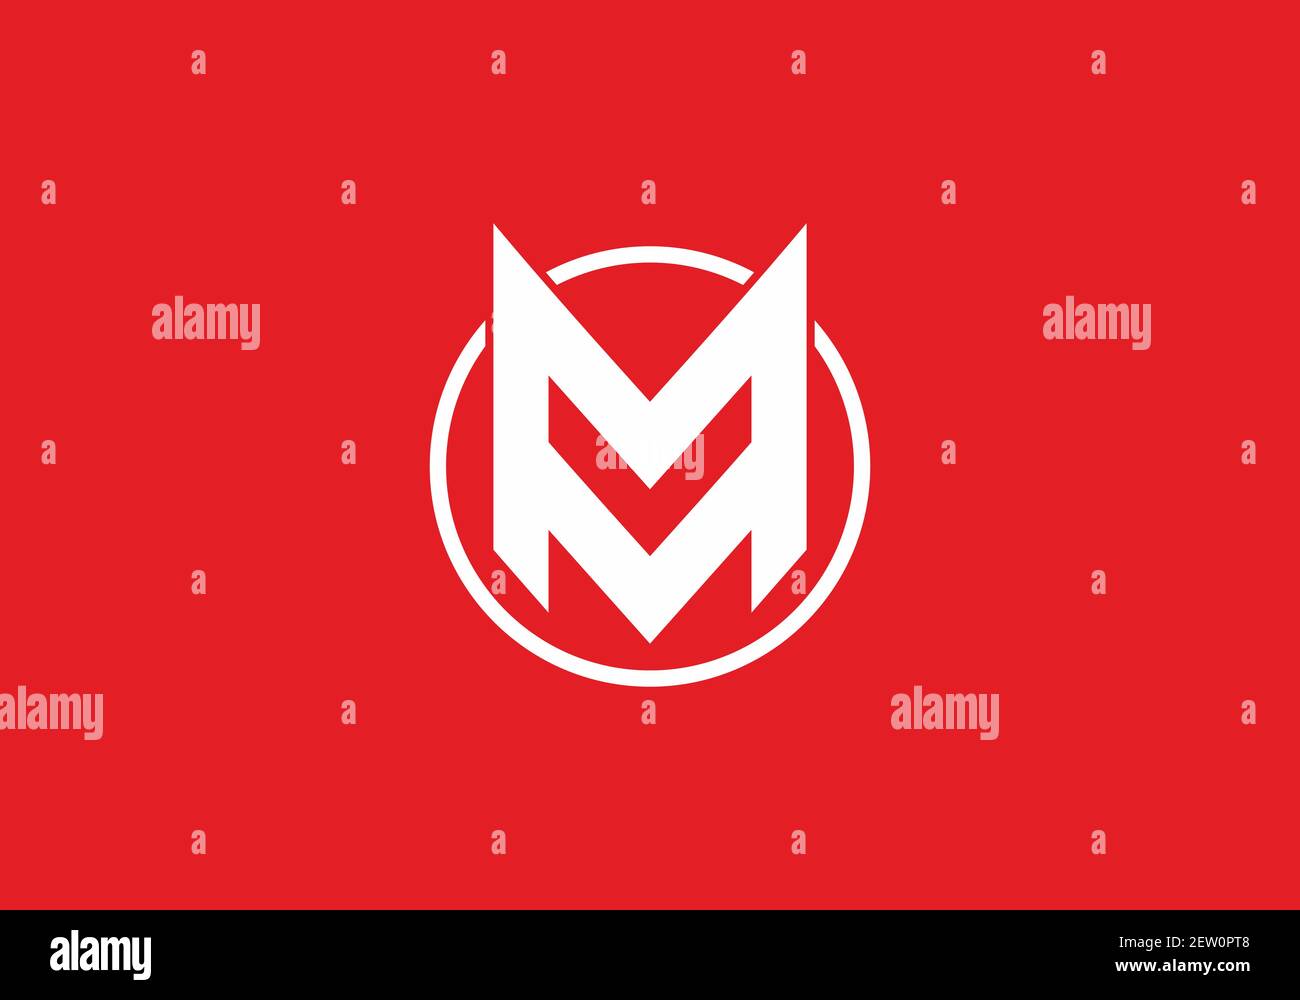 Double M Logo Vector Images (over 180)